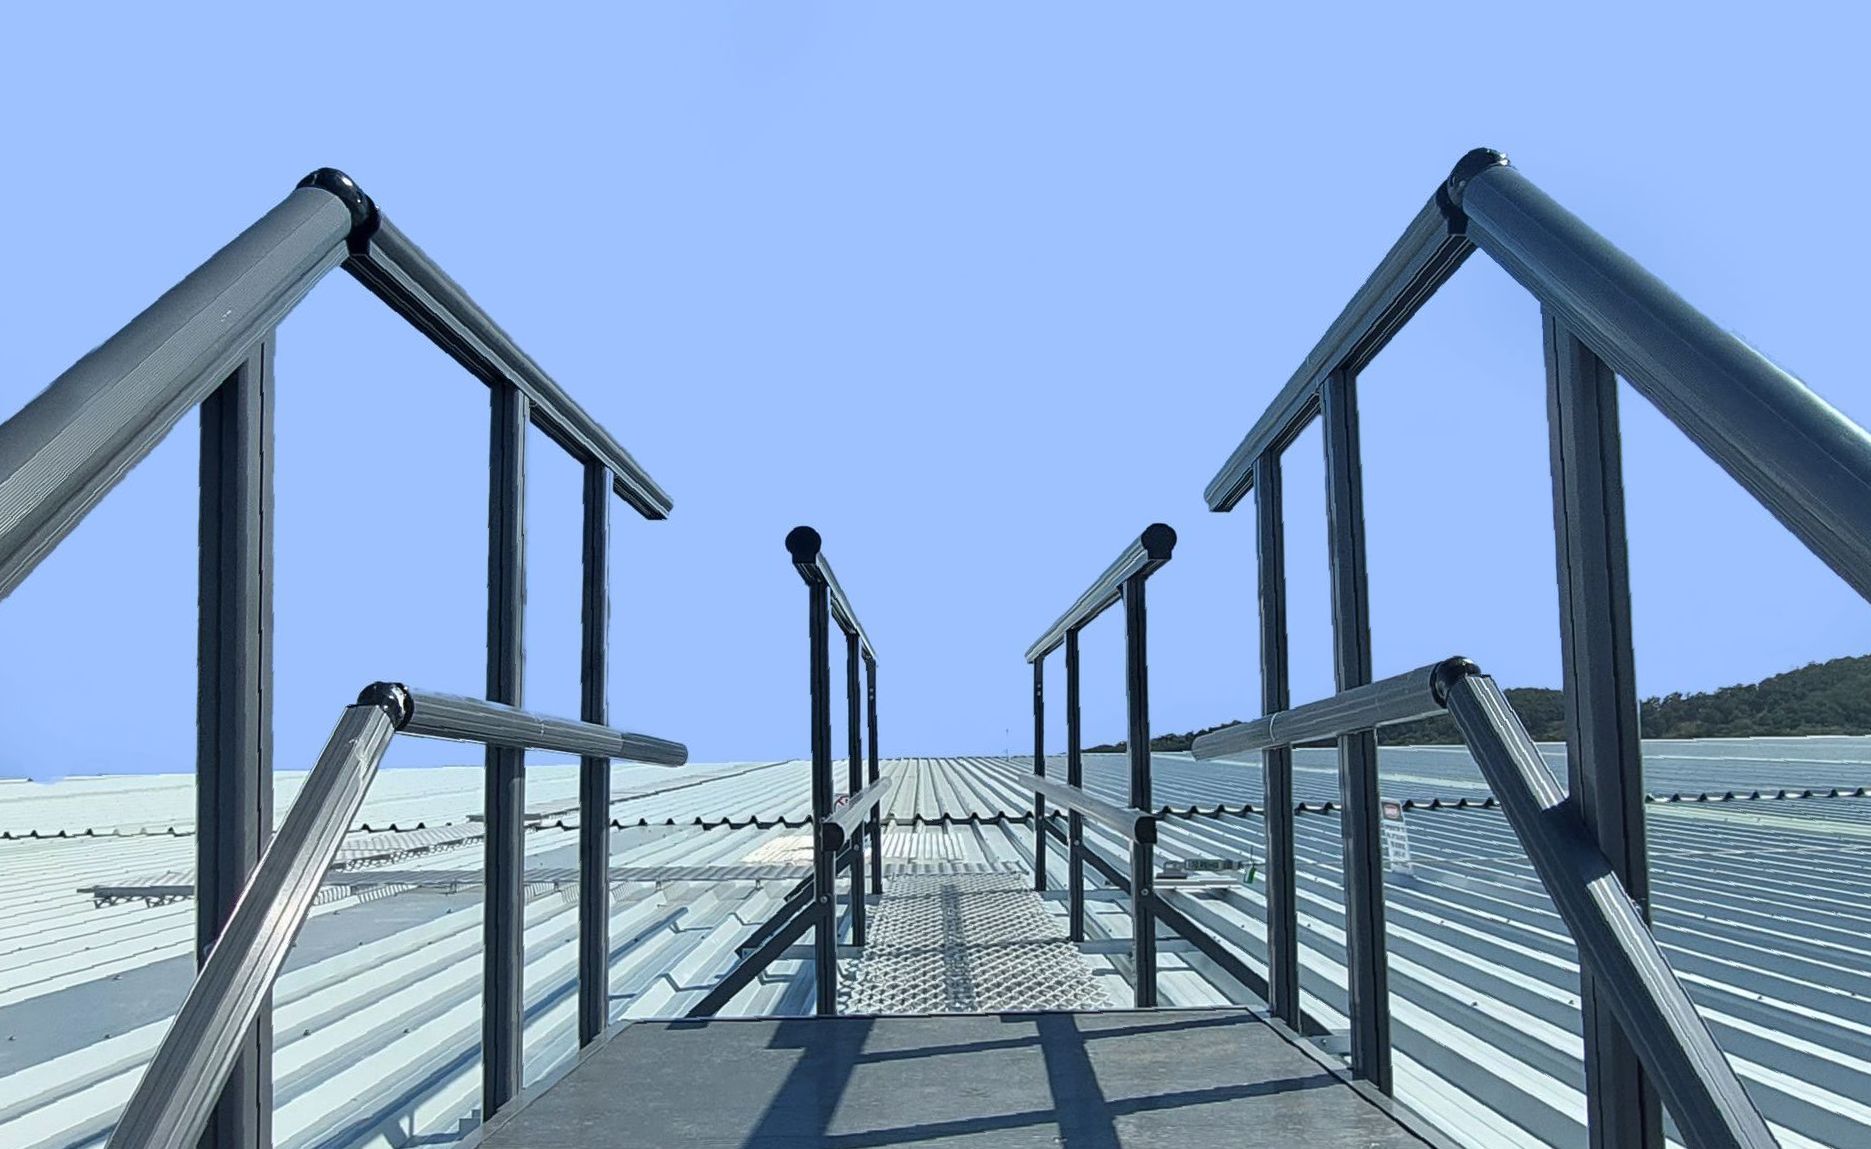 Image of a roof access system including mesh walkway, aluminium guardrail, access platform and access ladder.